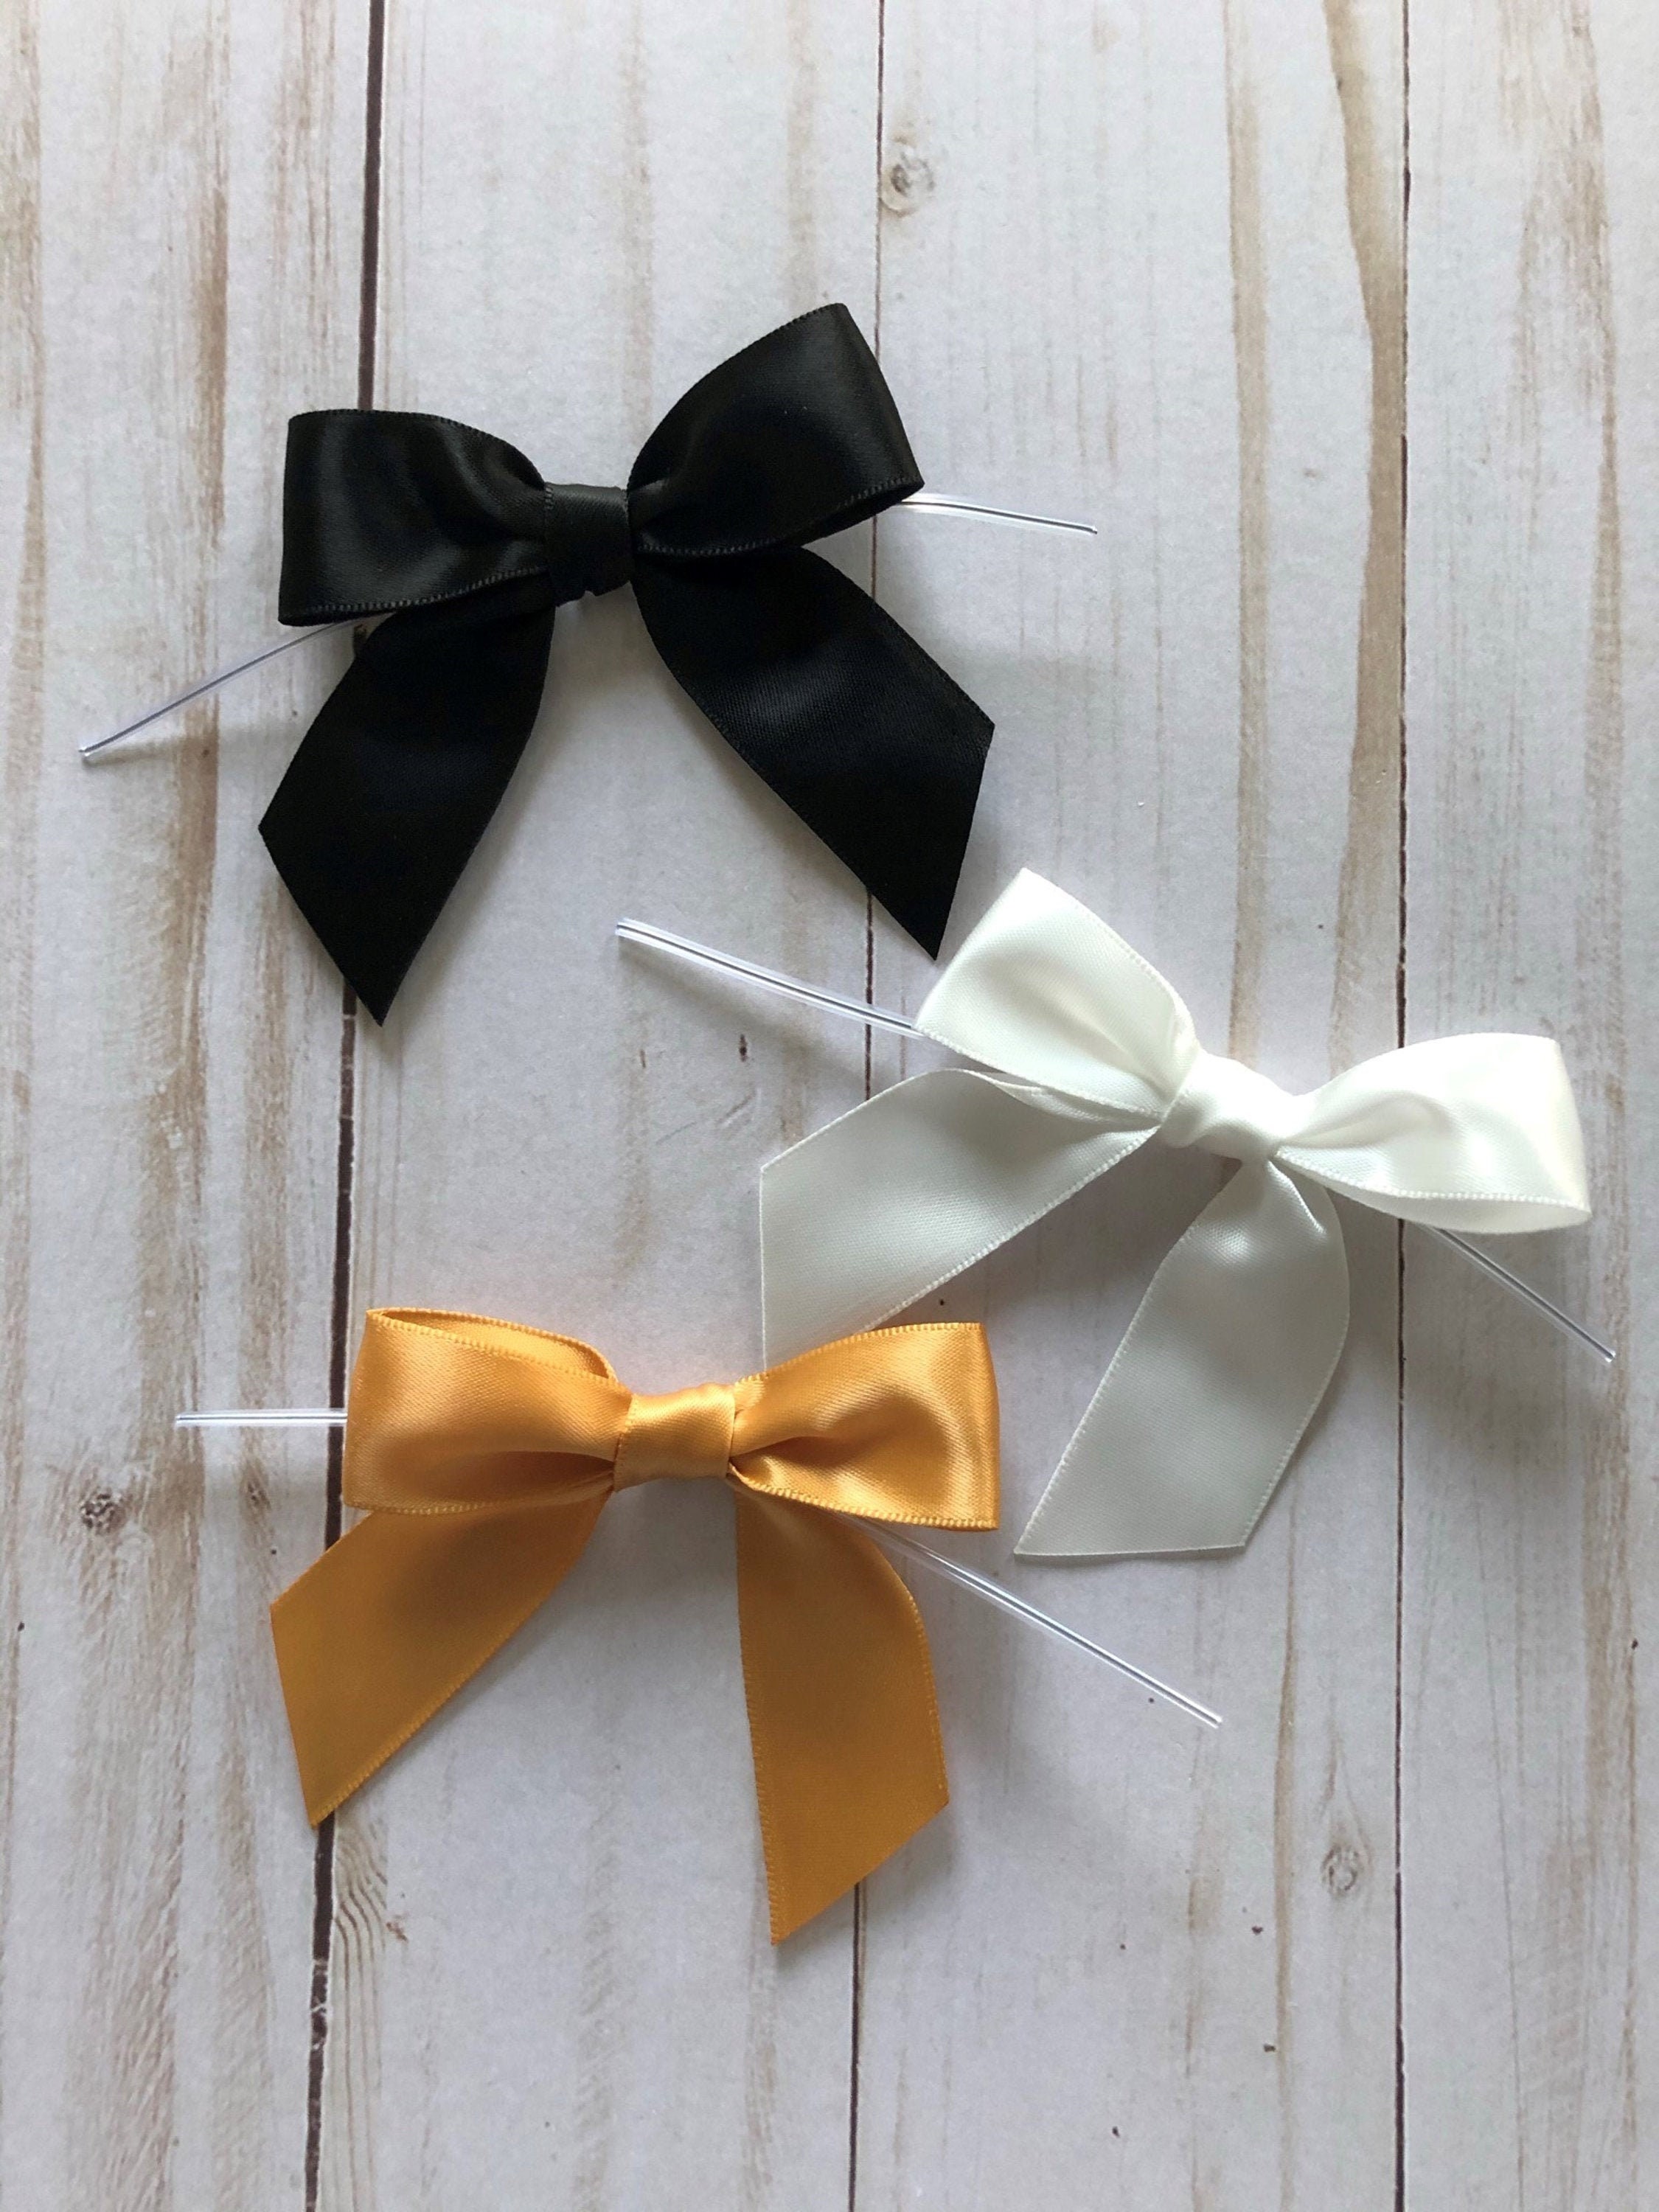  Gold Twist Tie Bow, 30 Pack Small Bows for Crafts, Christmas Gold  Bows for Gift Wrapping, Mini Pretied Satin Ribbon Bows, Twist Tie Bows for  Treat Bags Premade Tiny Bows for